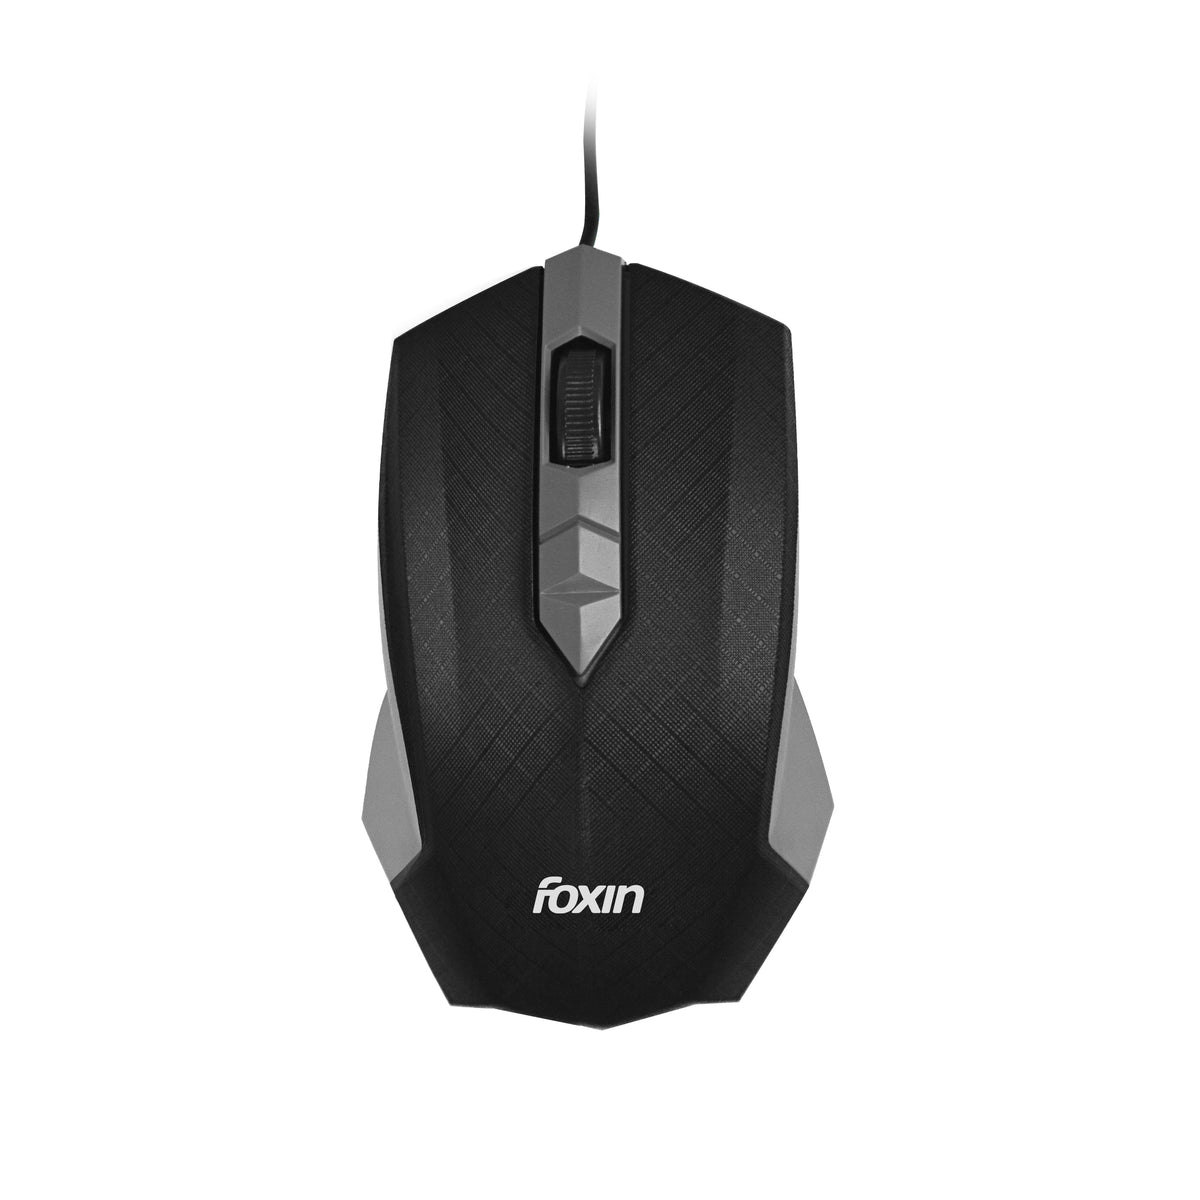 Foxin Smart Wired Mouse (FOXMOU0113)